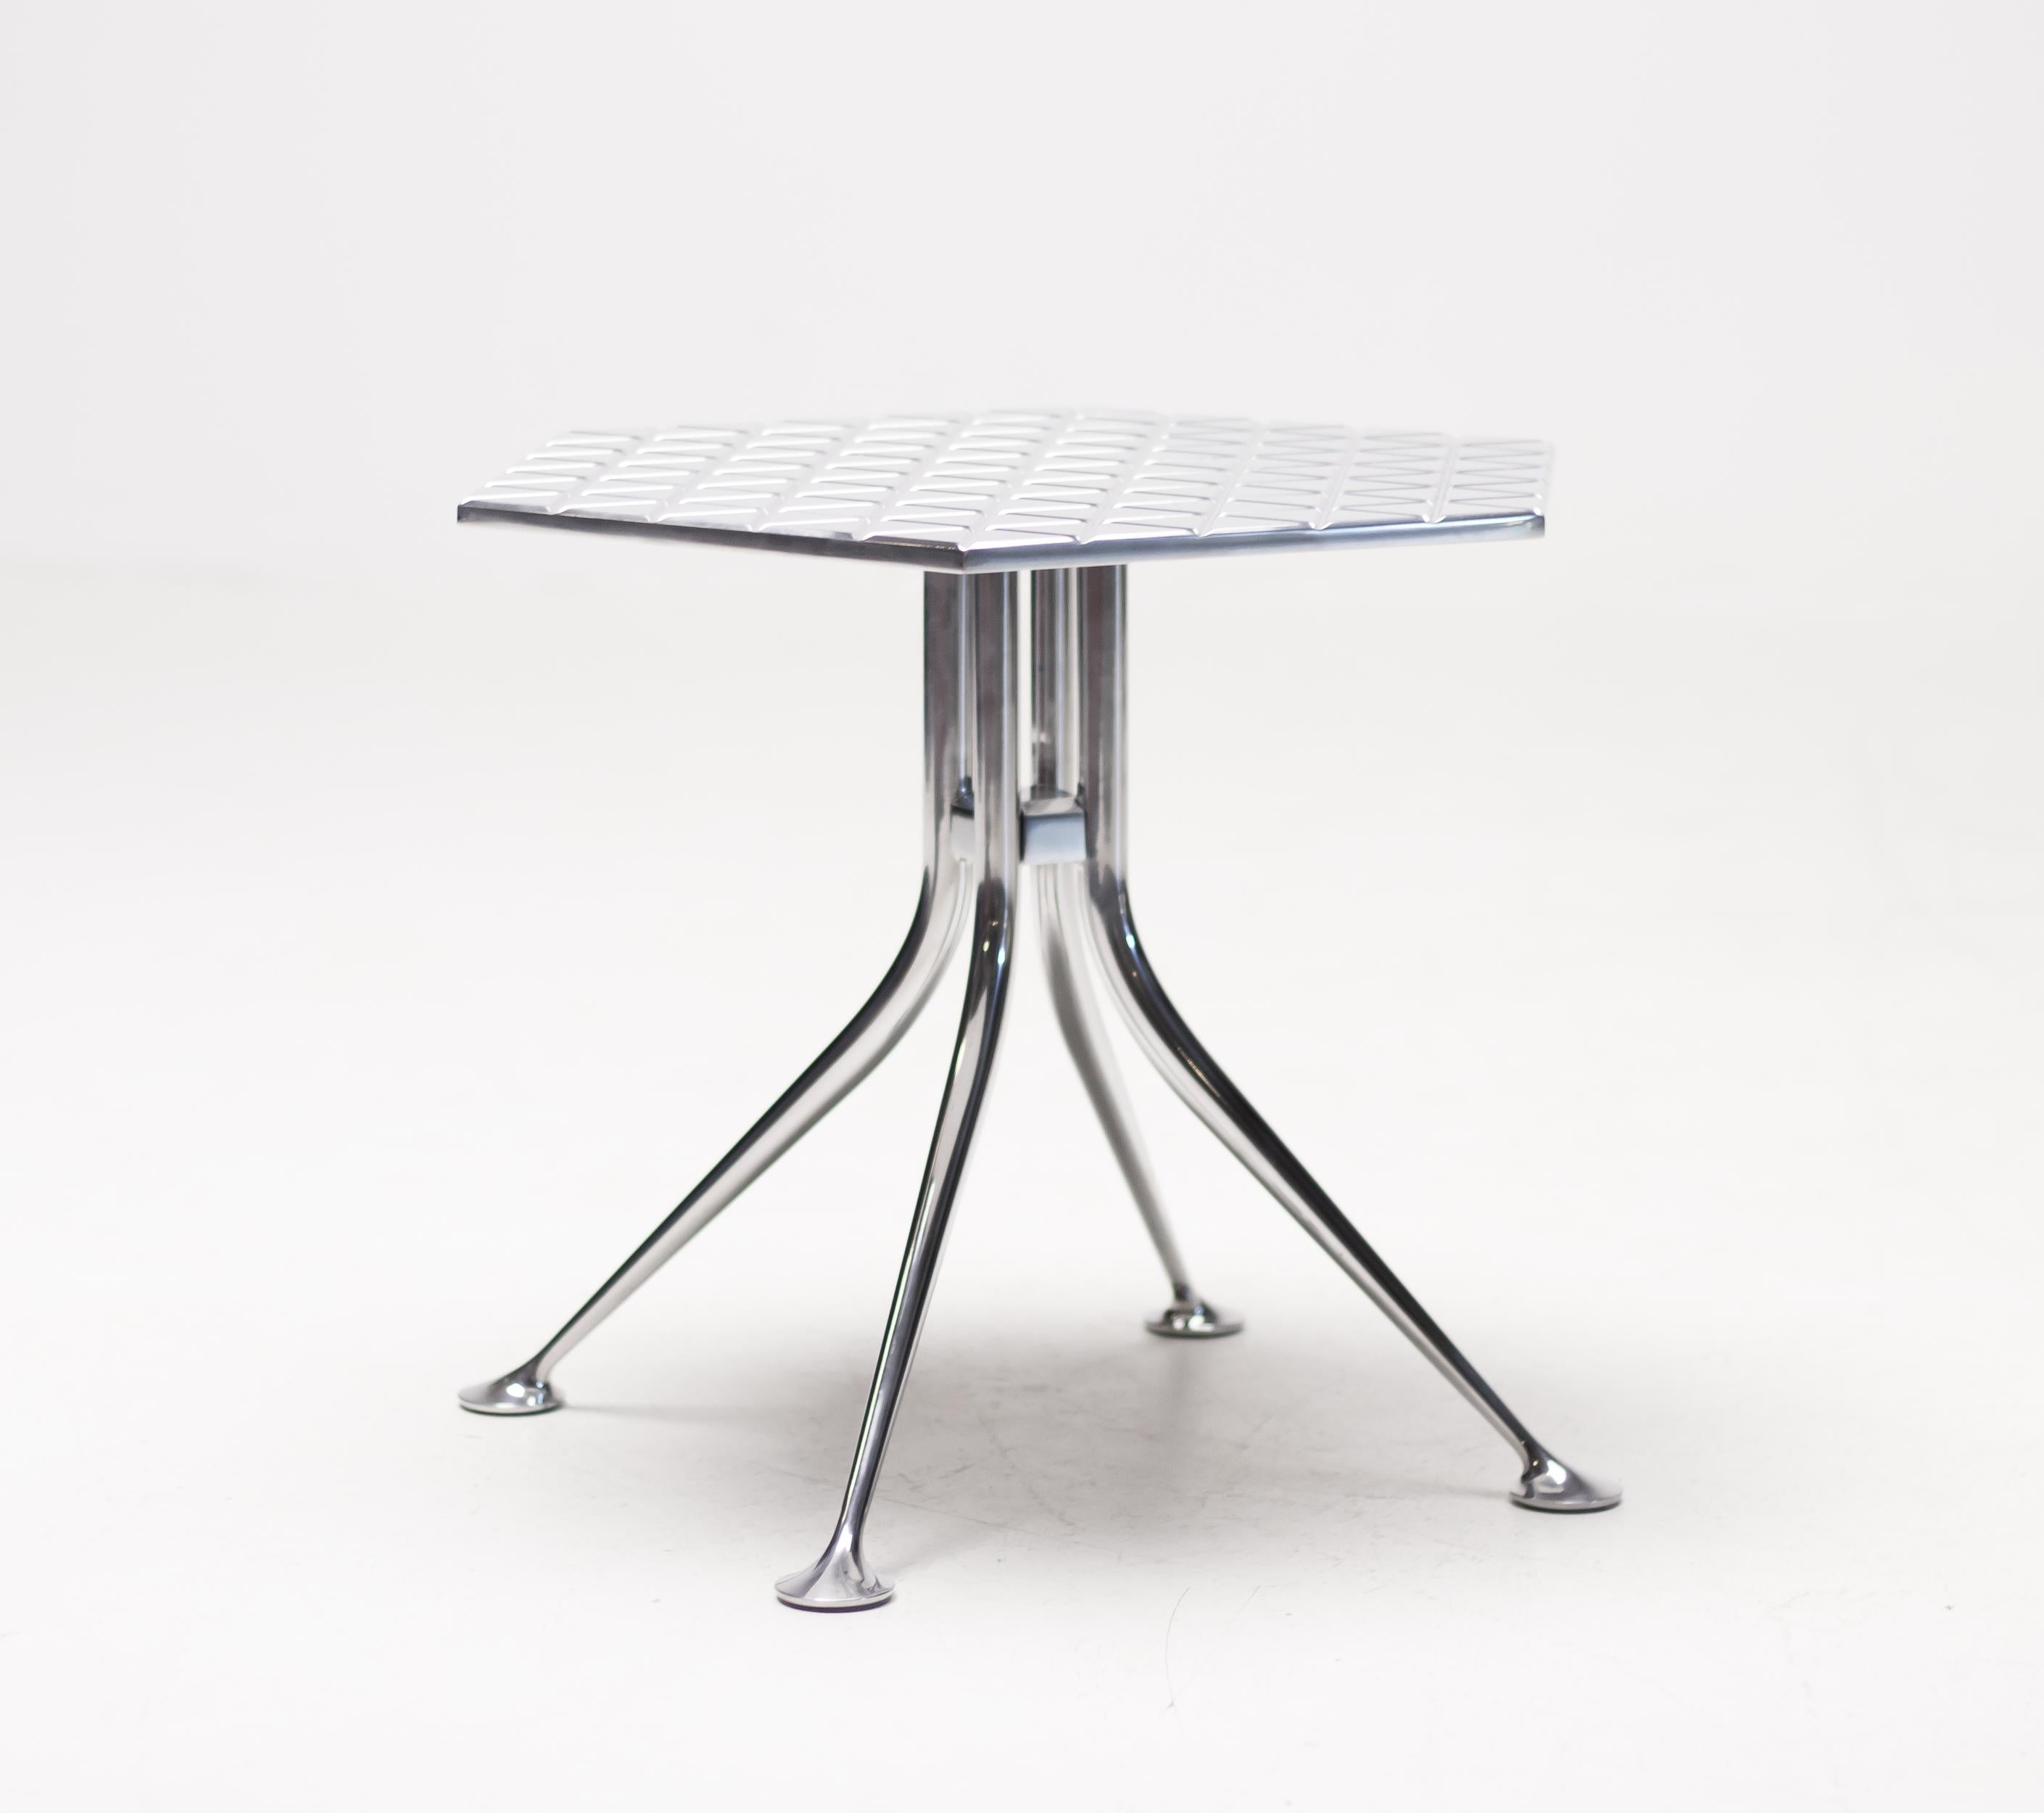 Cast and polished aluminium hexagonal table by Alexander Girard designed for Herman Miller and Braniff Airlines.